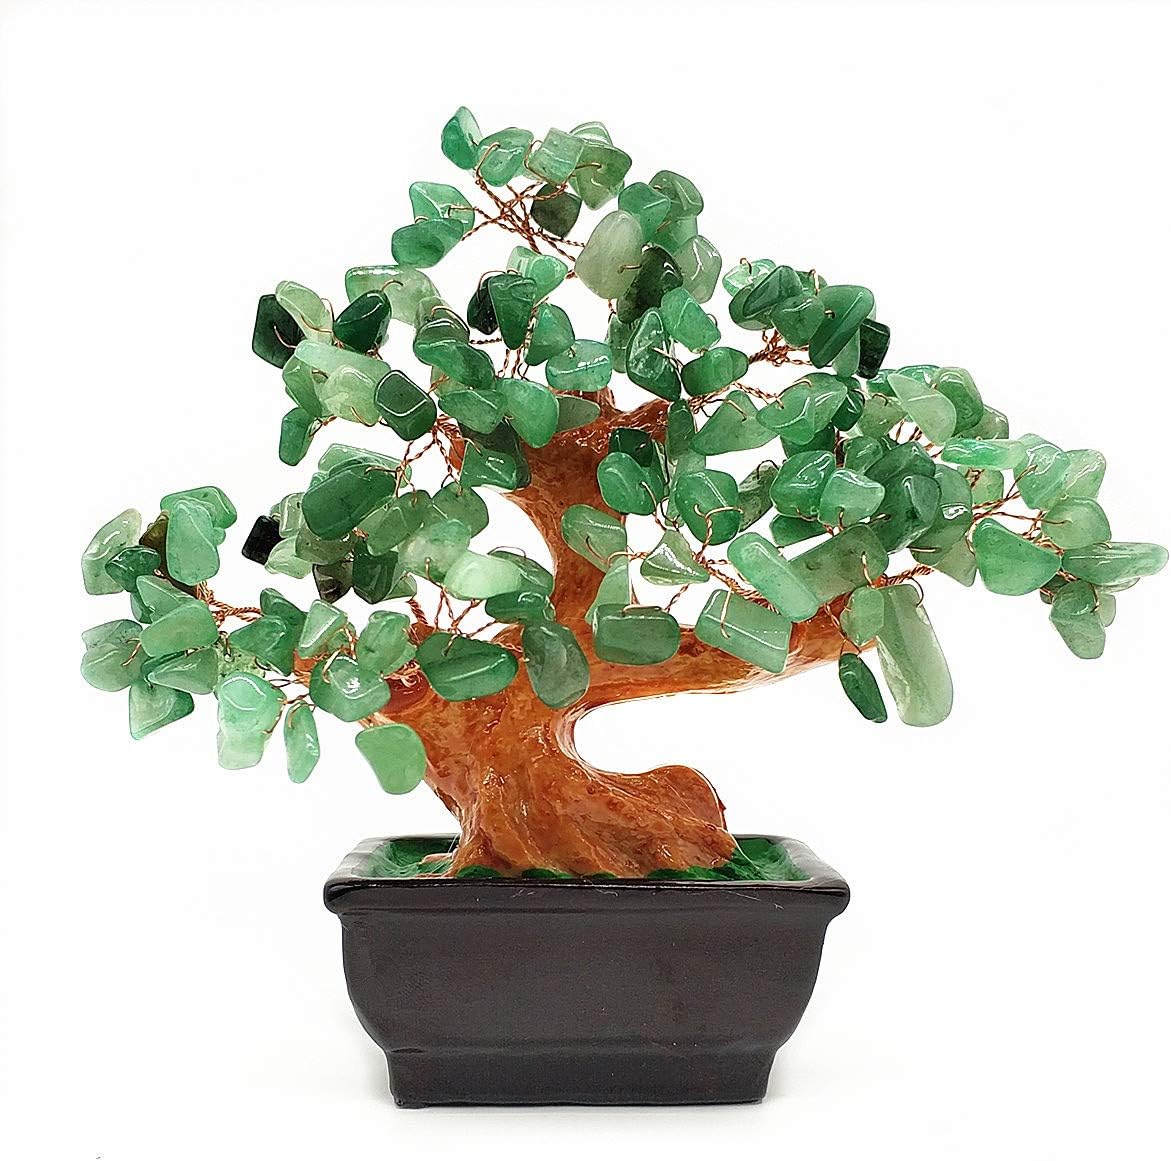 Colorsheng Feng Shui Quartz Crystal Money Tree Bonsai Style Decoration For Luck And Wealth Green